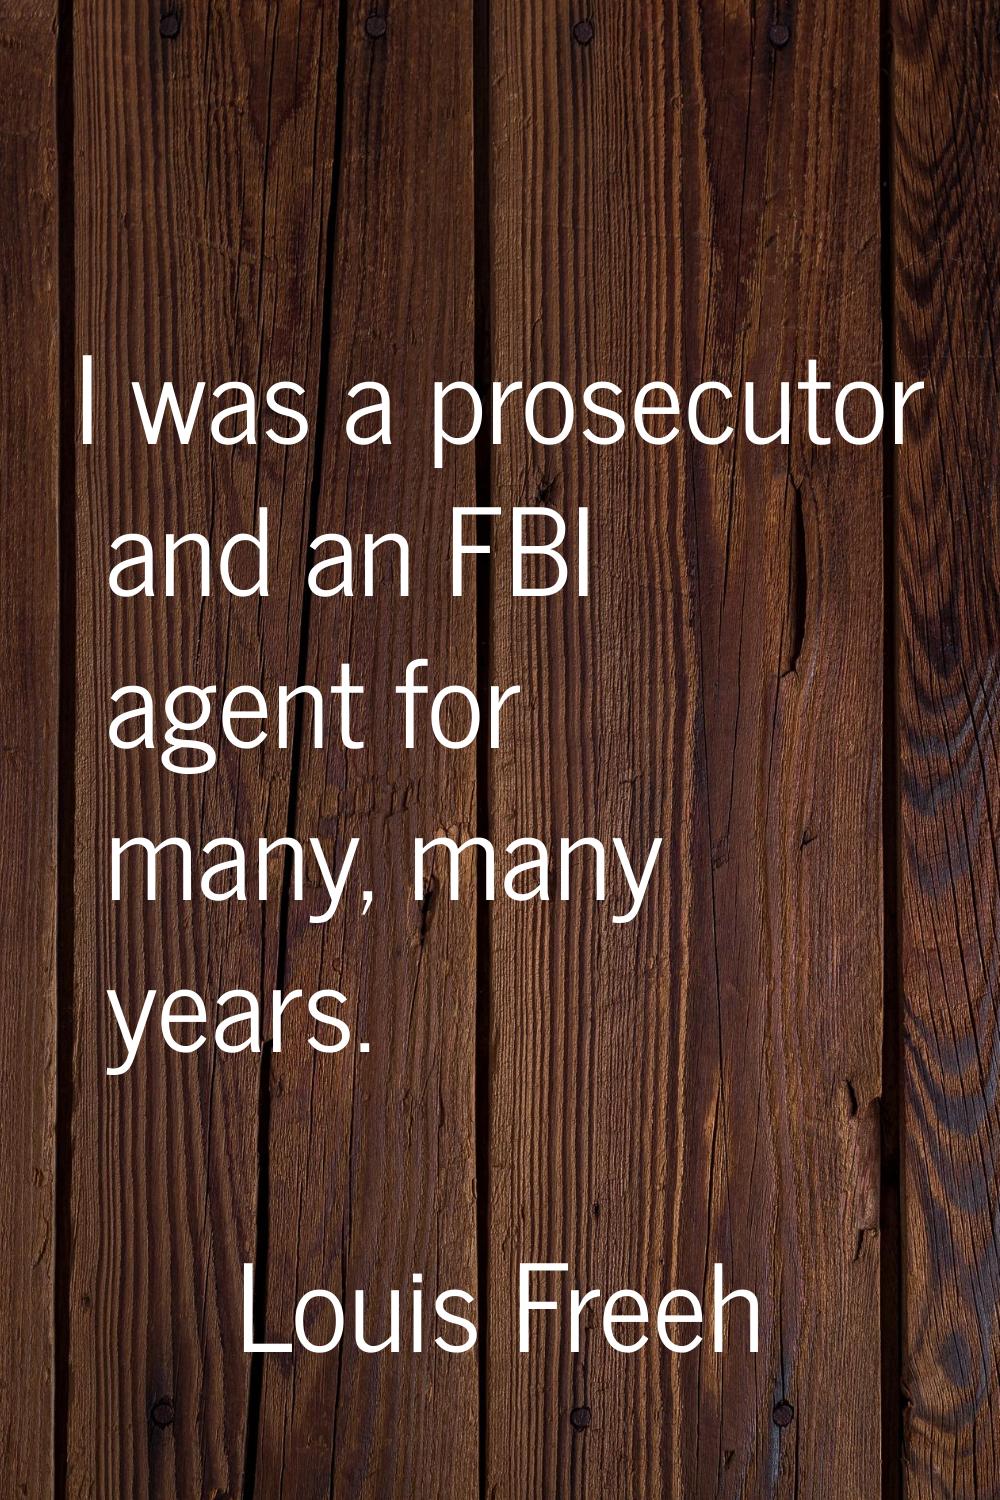 I was a prosecutor and an FBI agent for many, many years.